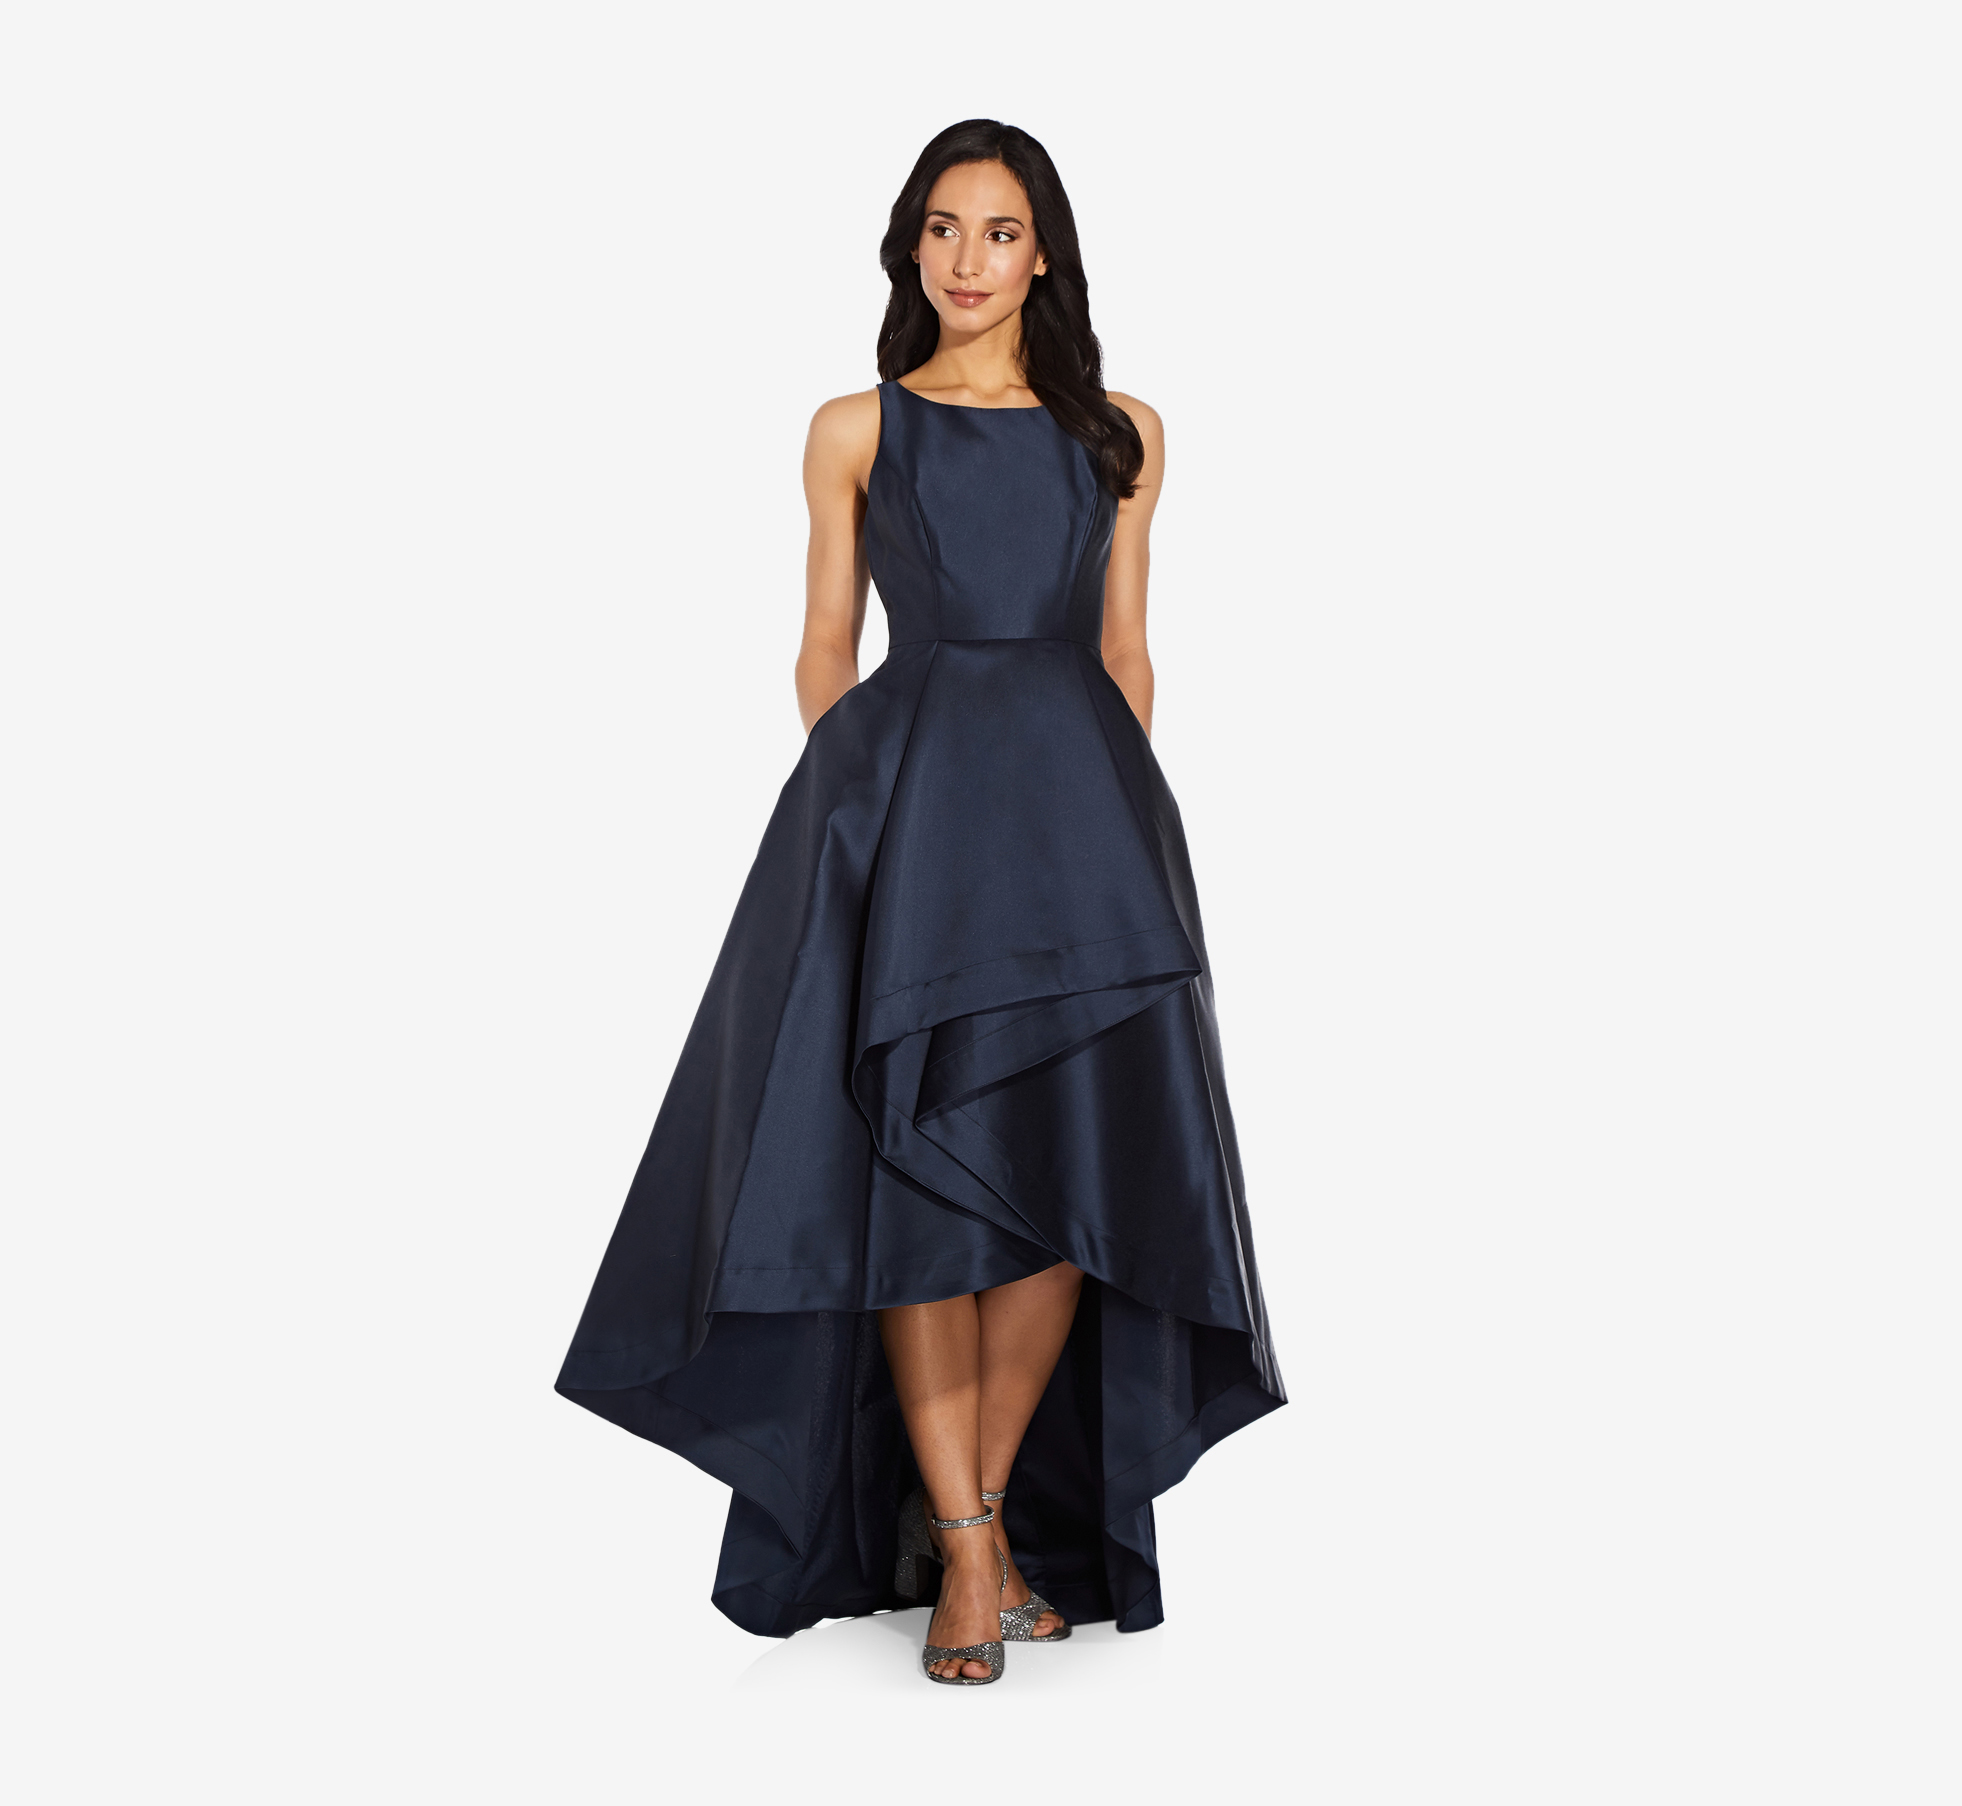 Dresses with Pockets Style Guide | Adrianna Papell